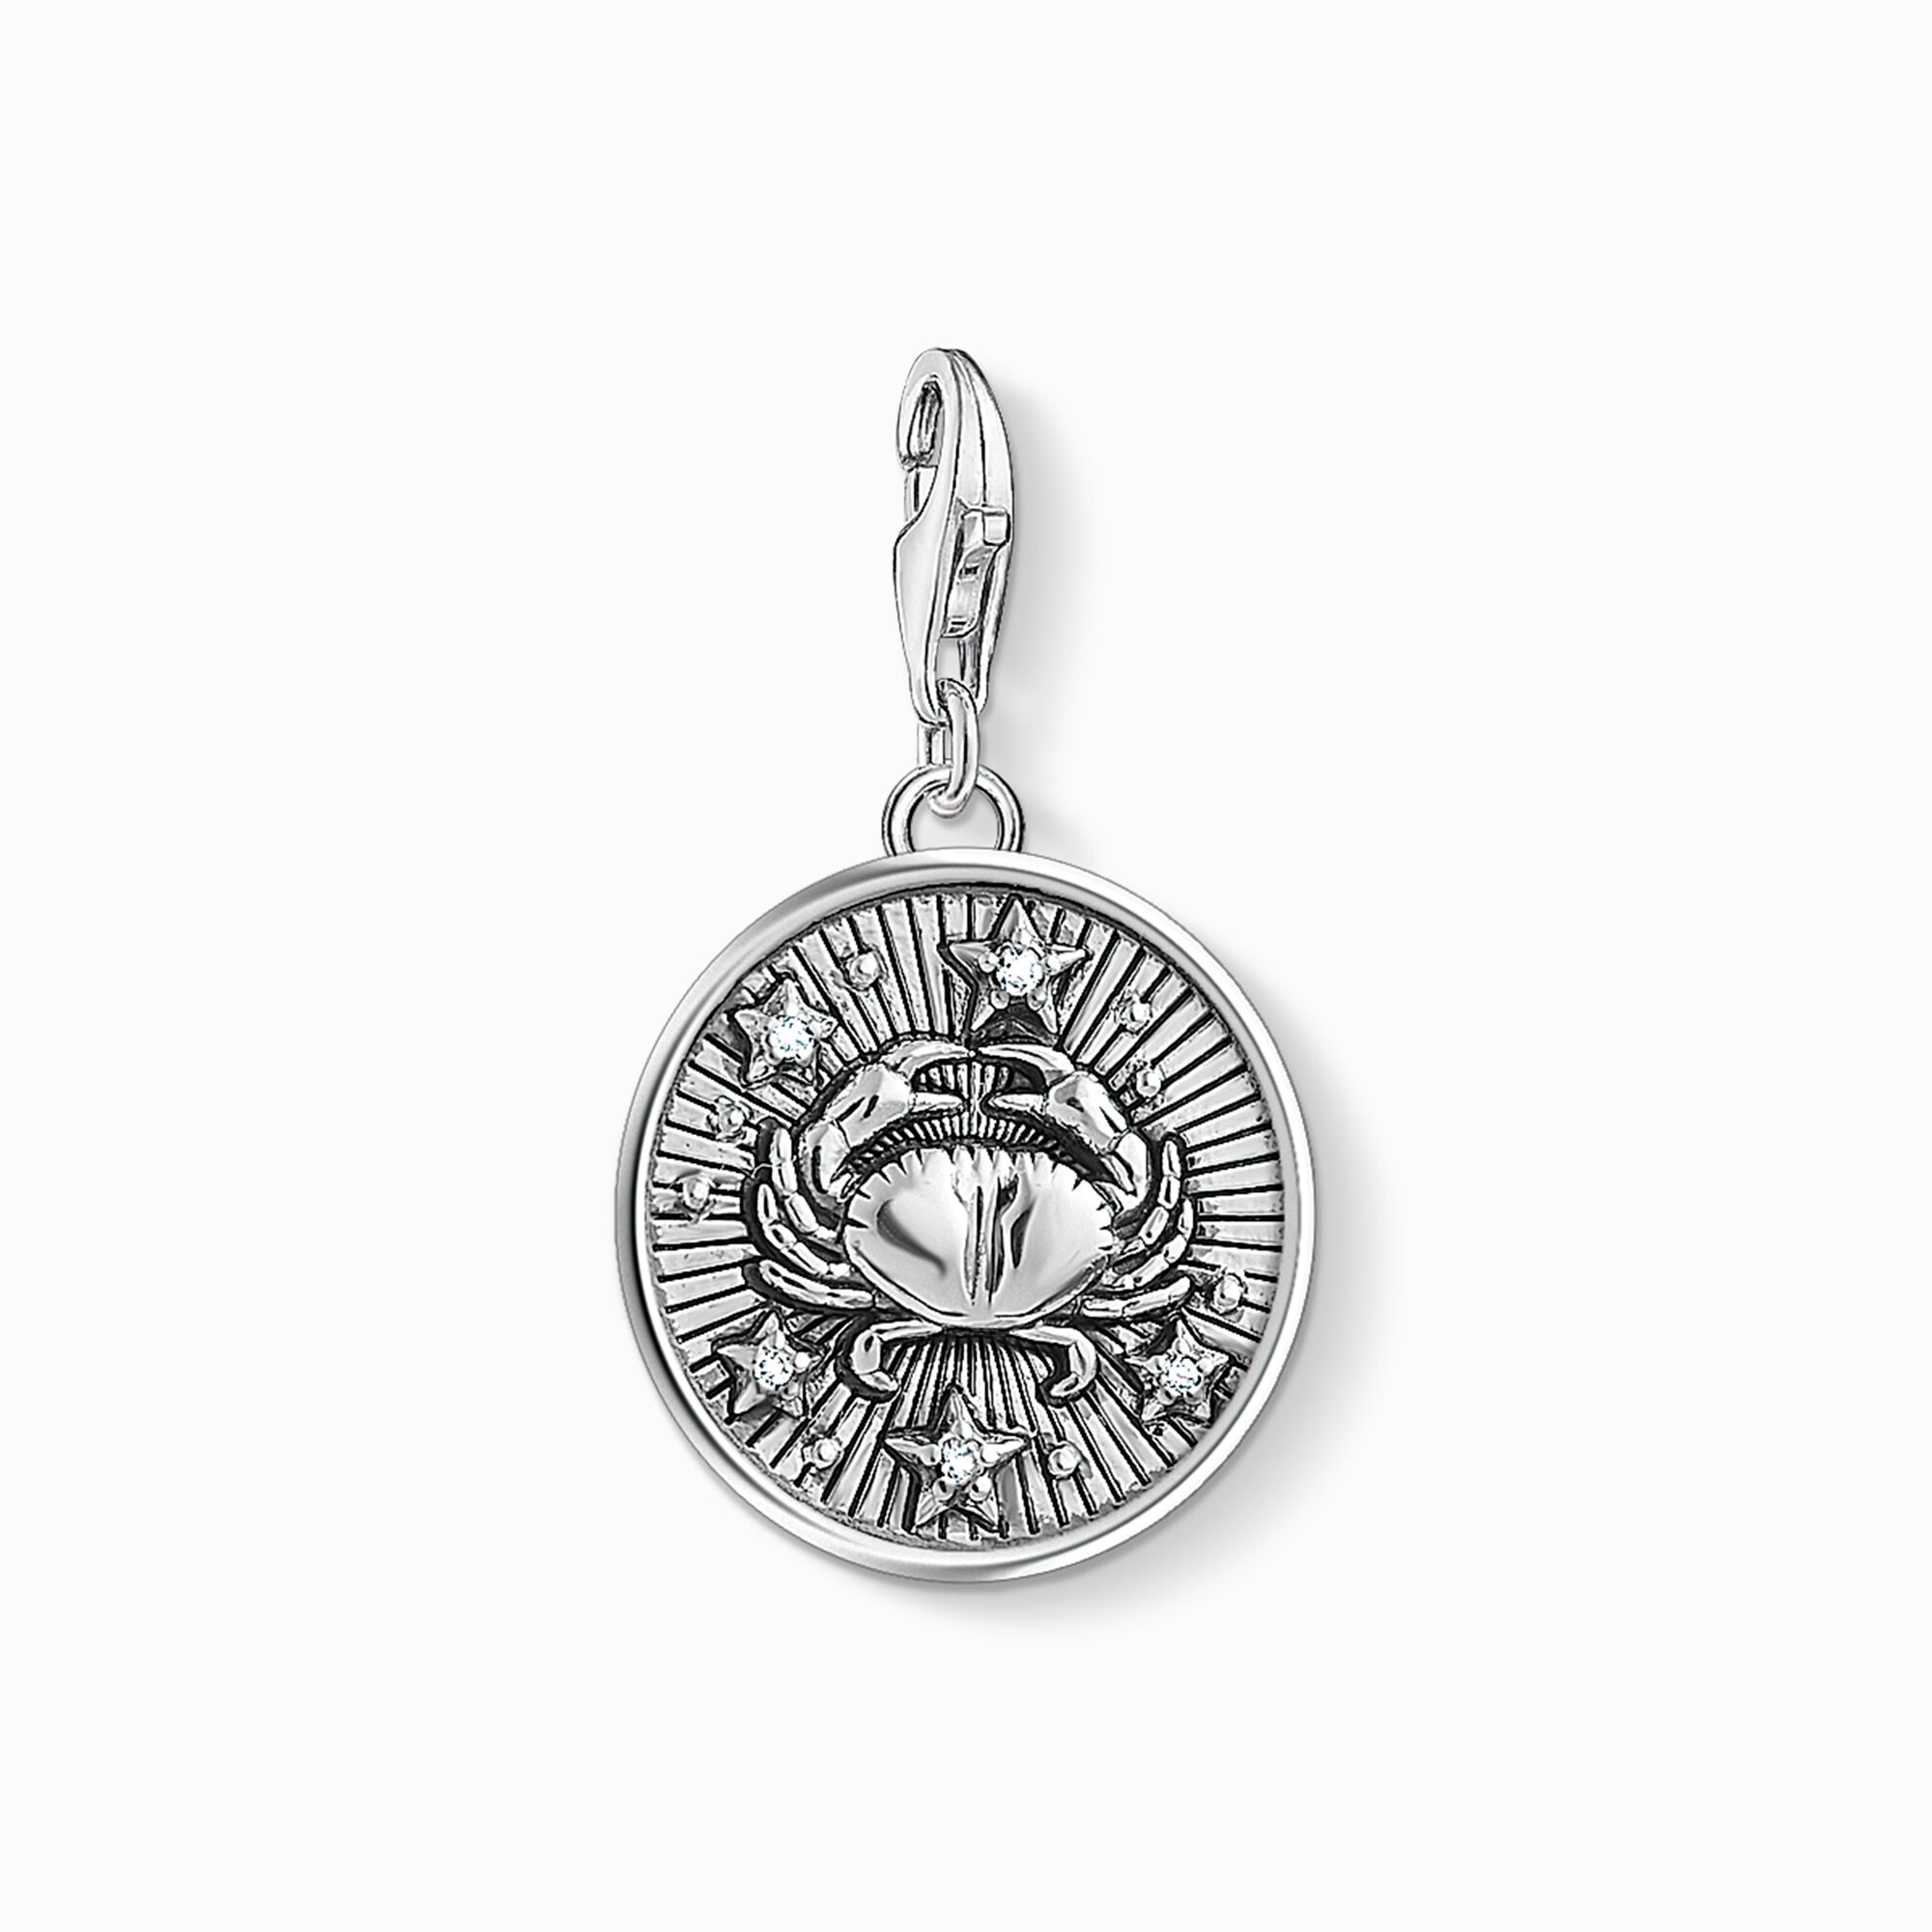 Charm pendant zodiac sign Cancer from the Charm Club collection in the THOMAS SABO online store